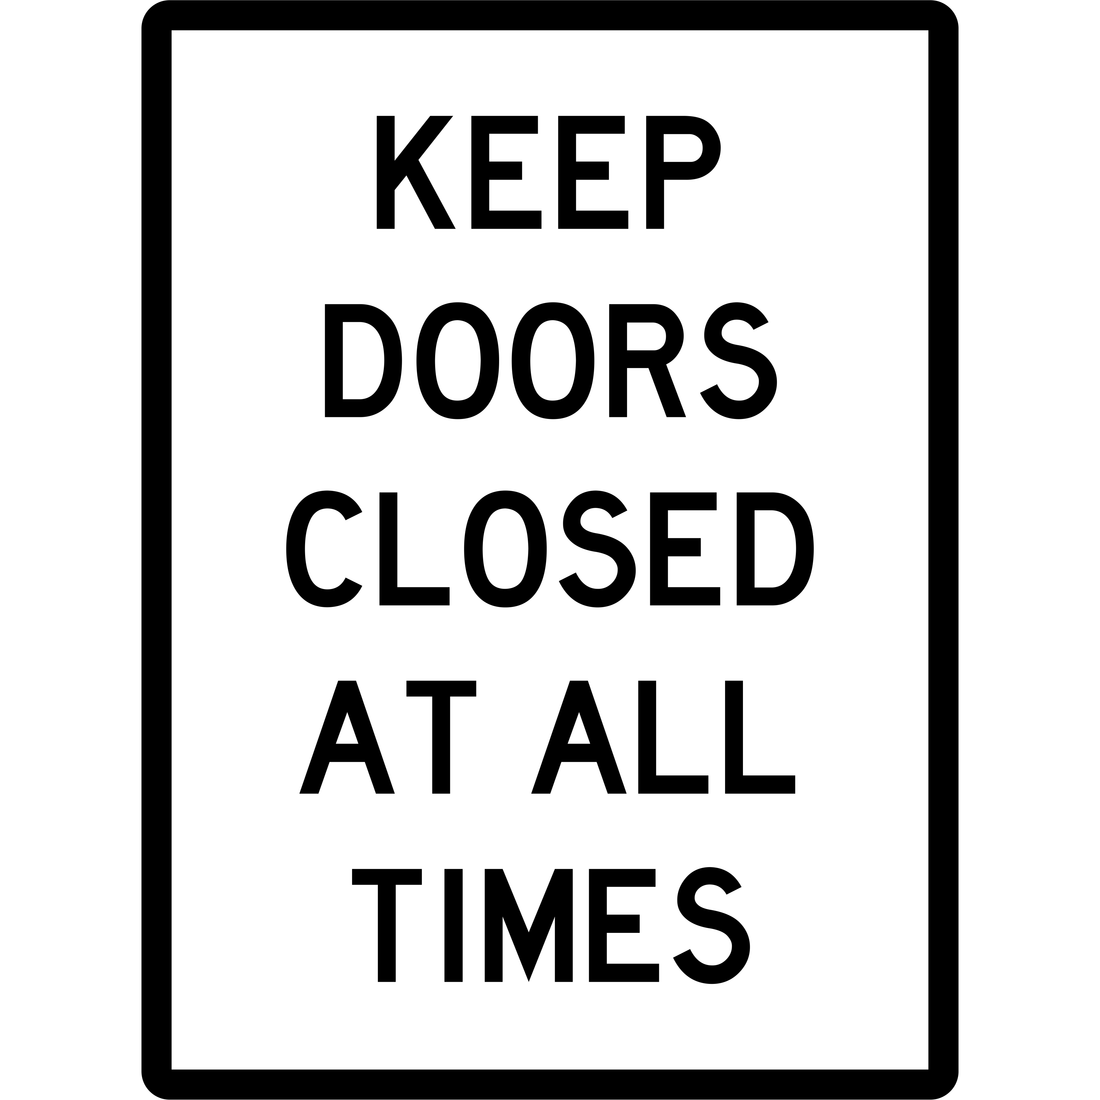 GENERAL - KEEP YOUR DOORS CLOSED AT ALL TIMES